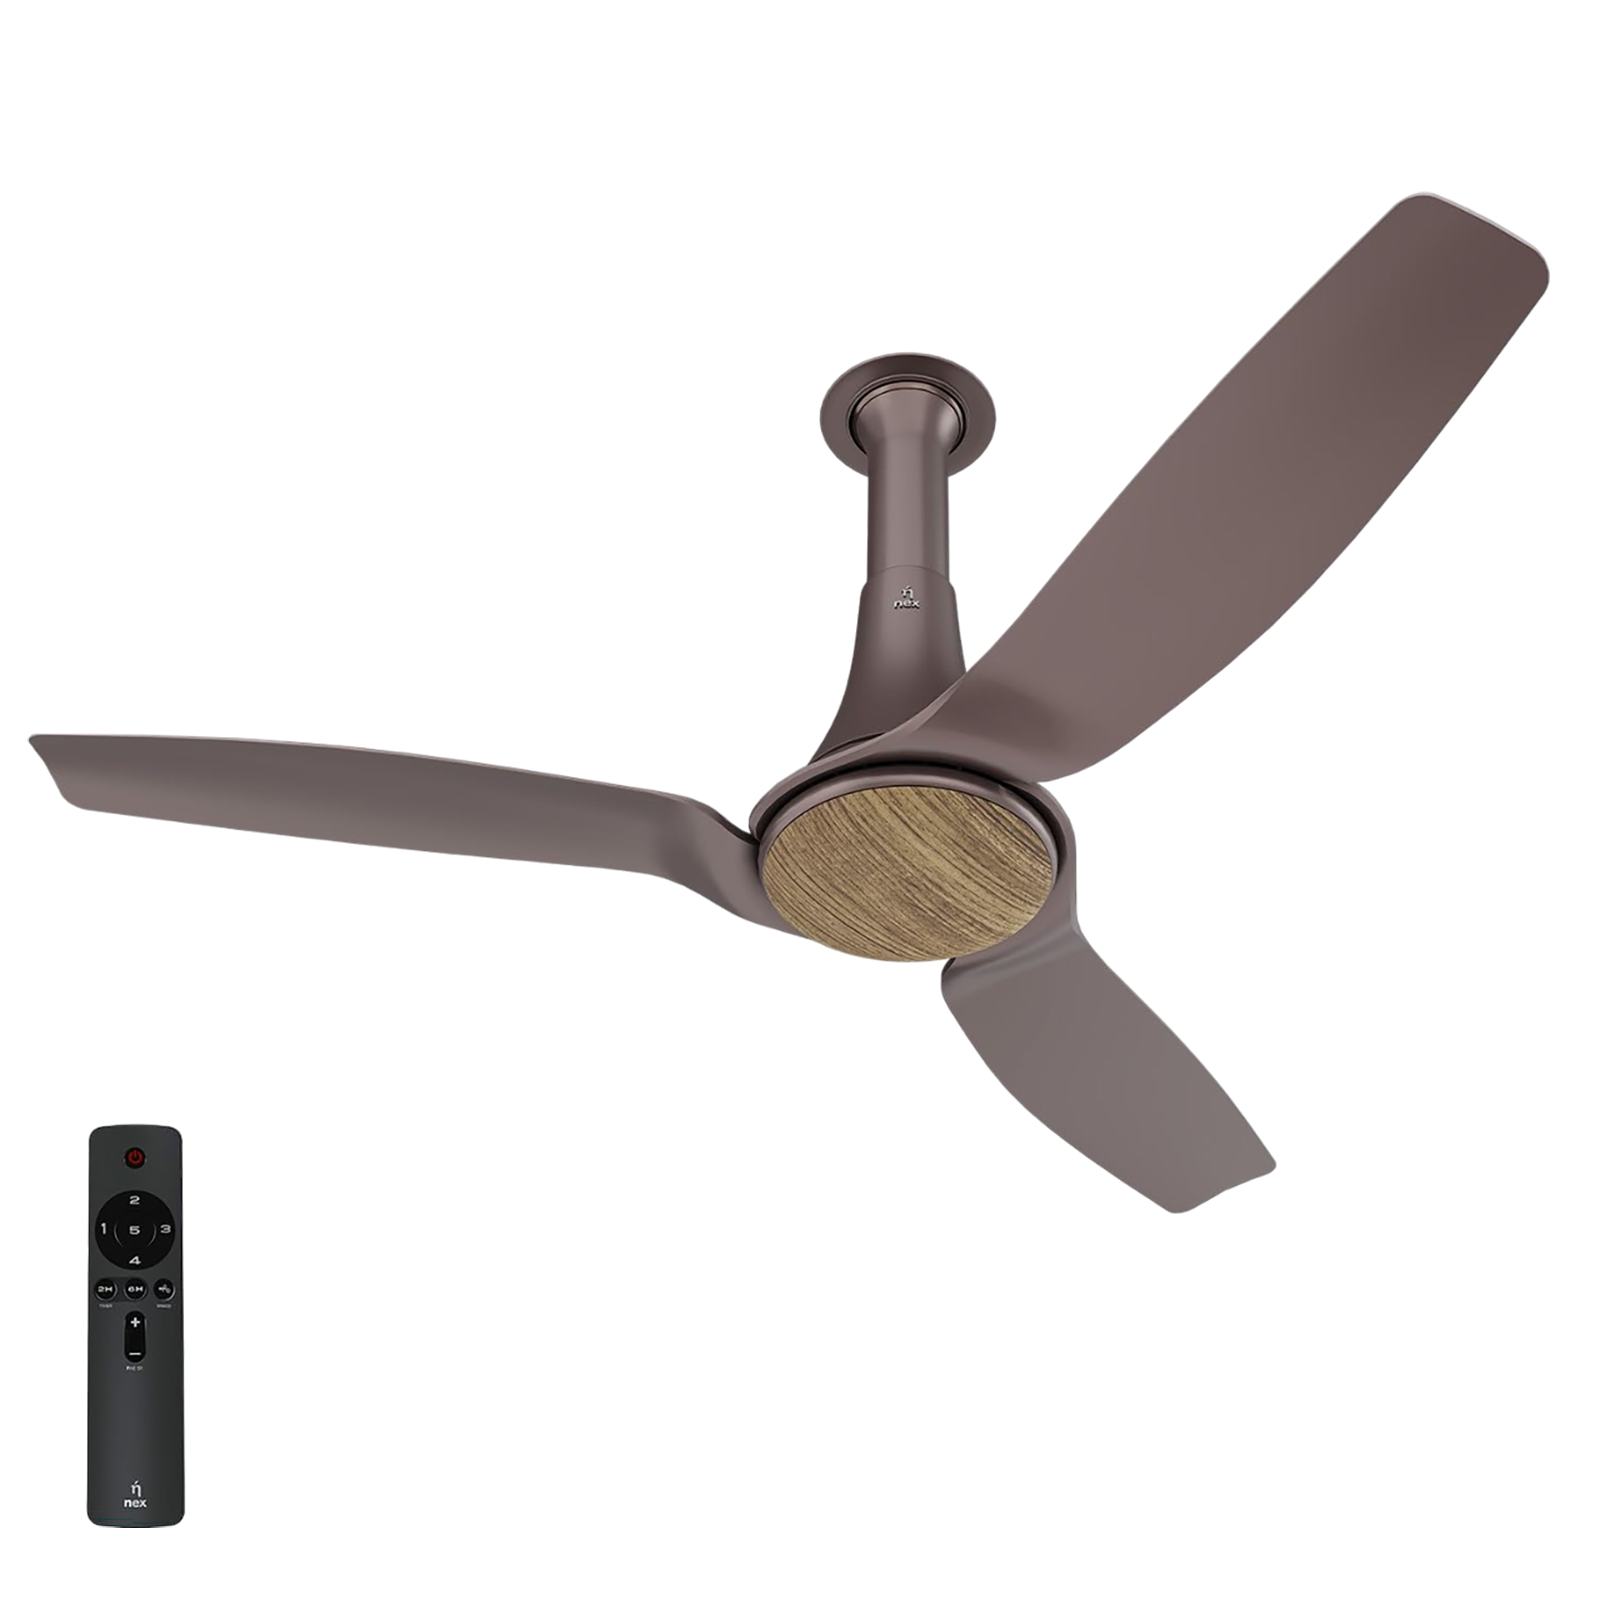 nex Dryft A90 5 Star 1200mm 3 Blade BLDC Motor Ceiling Fan with Remote (Dust Resistant, Chestnut Brown)